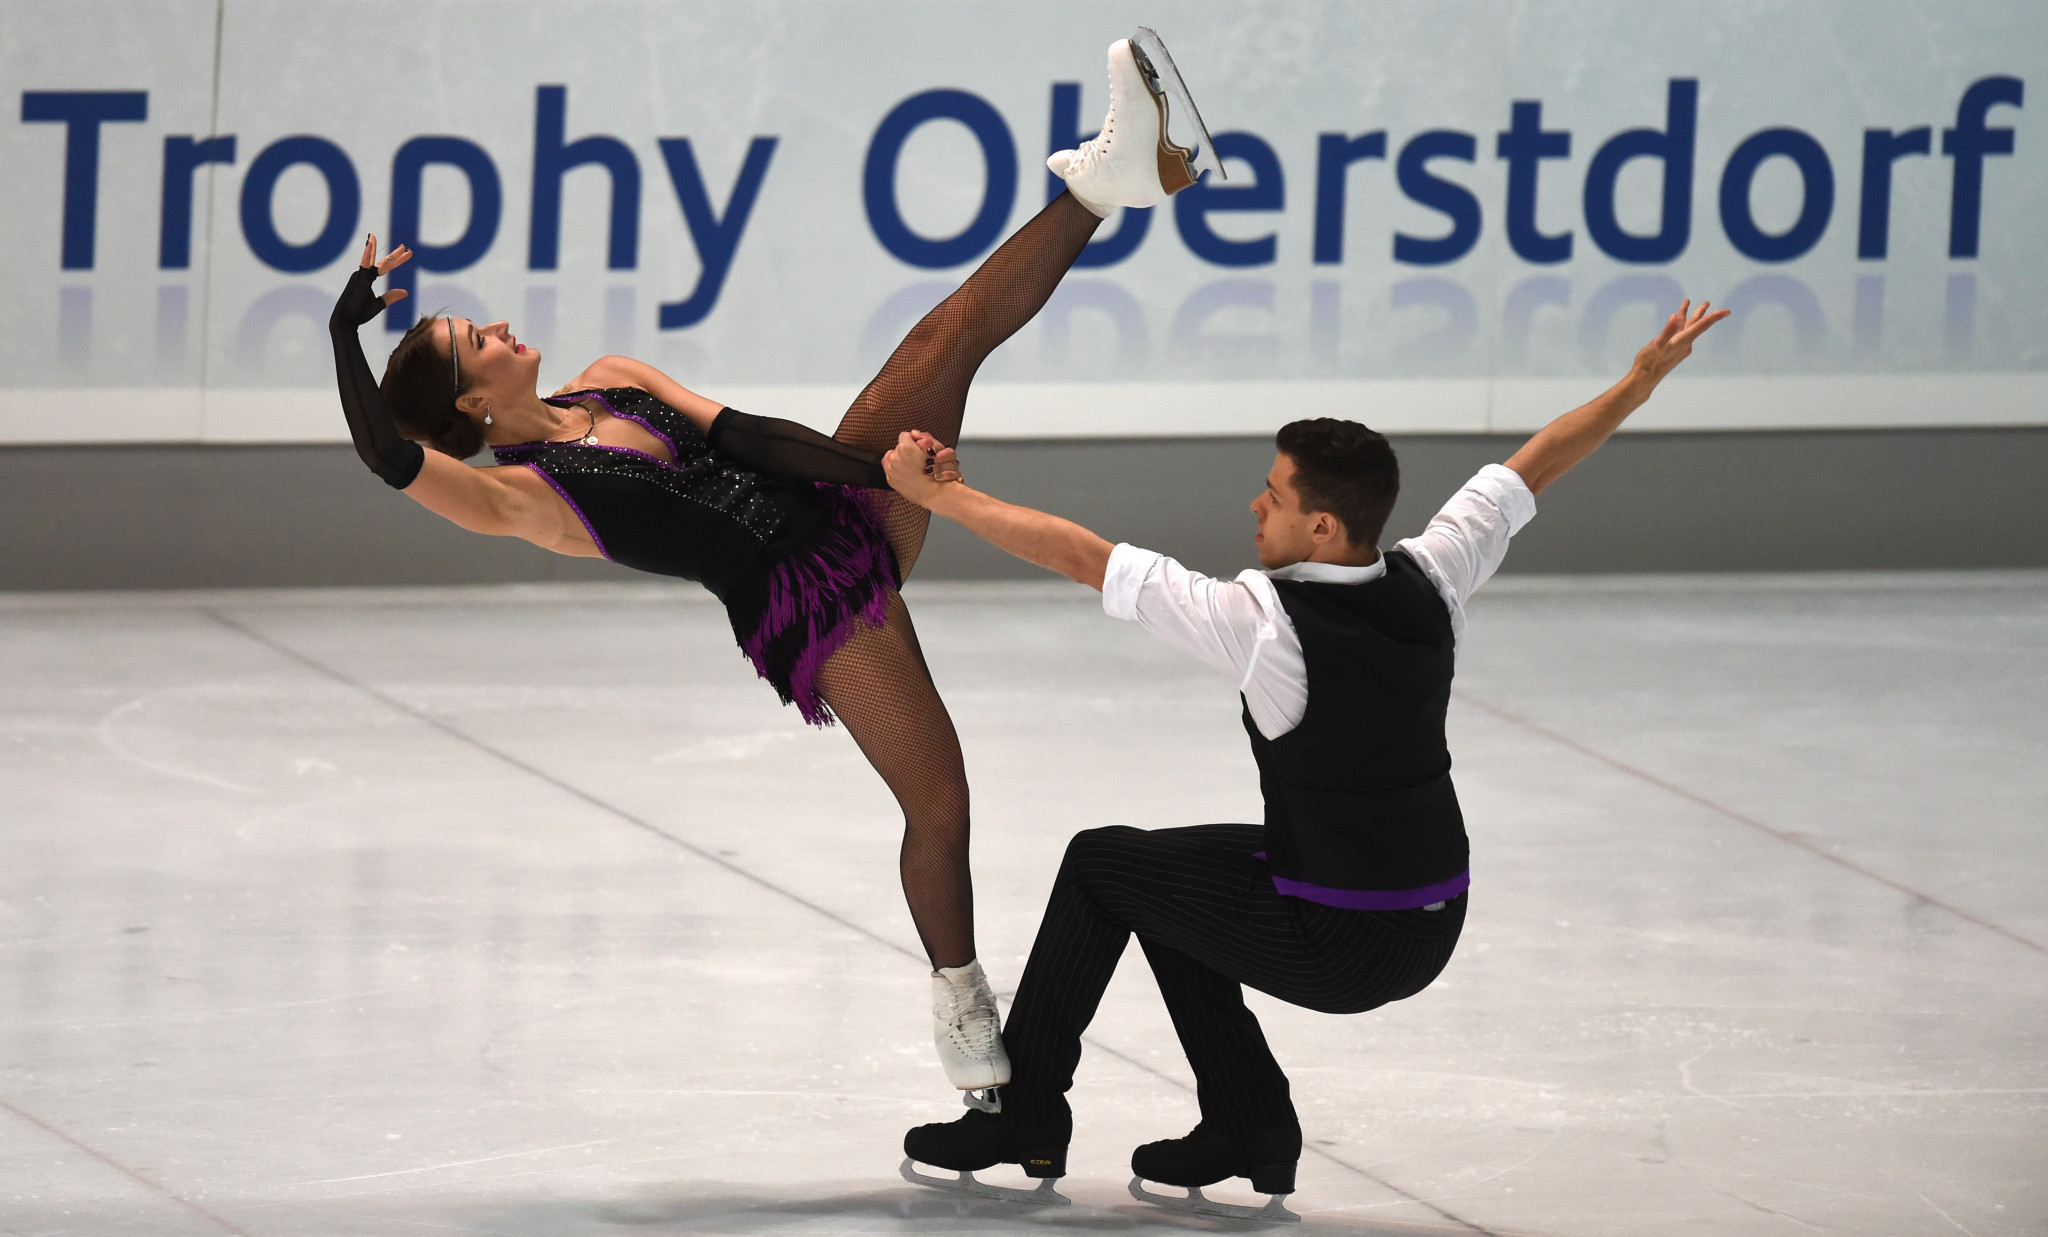 The Nebelhorn Trophy is used as a final qualification event for the Winter Olympics ©Getty Images